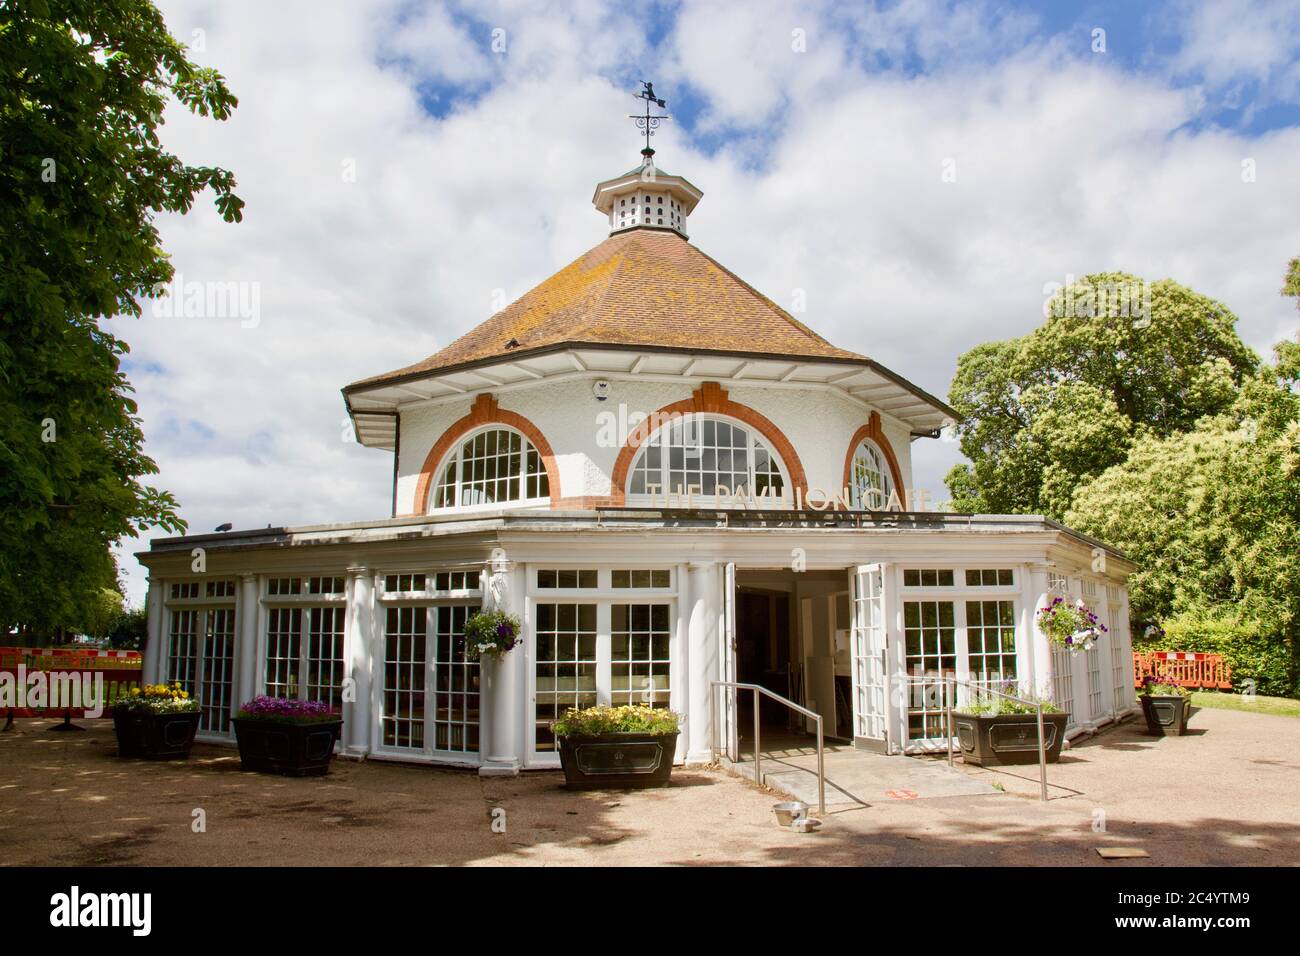 The Pavilion Cafe in Greenwich Park Stock Photo